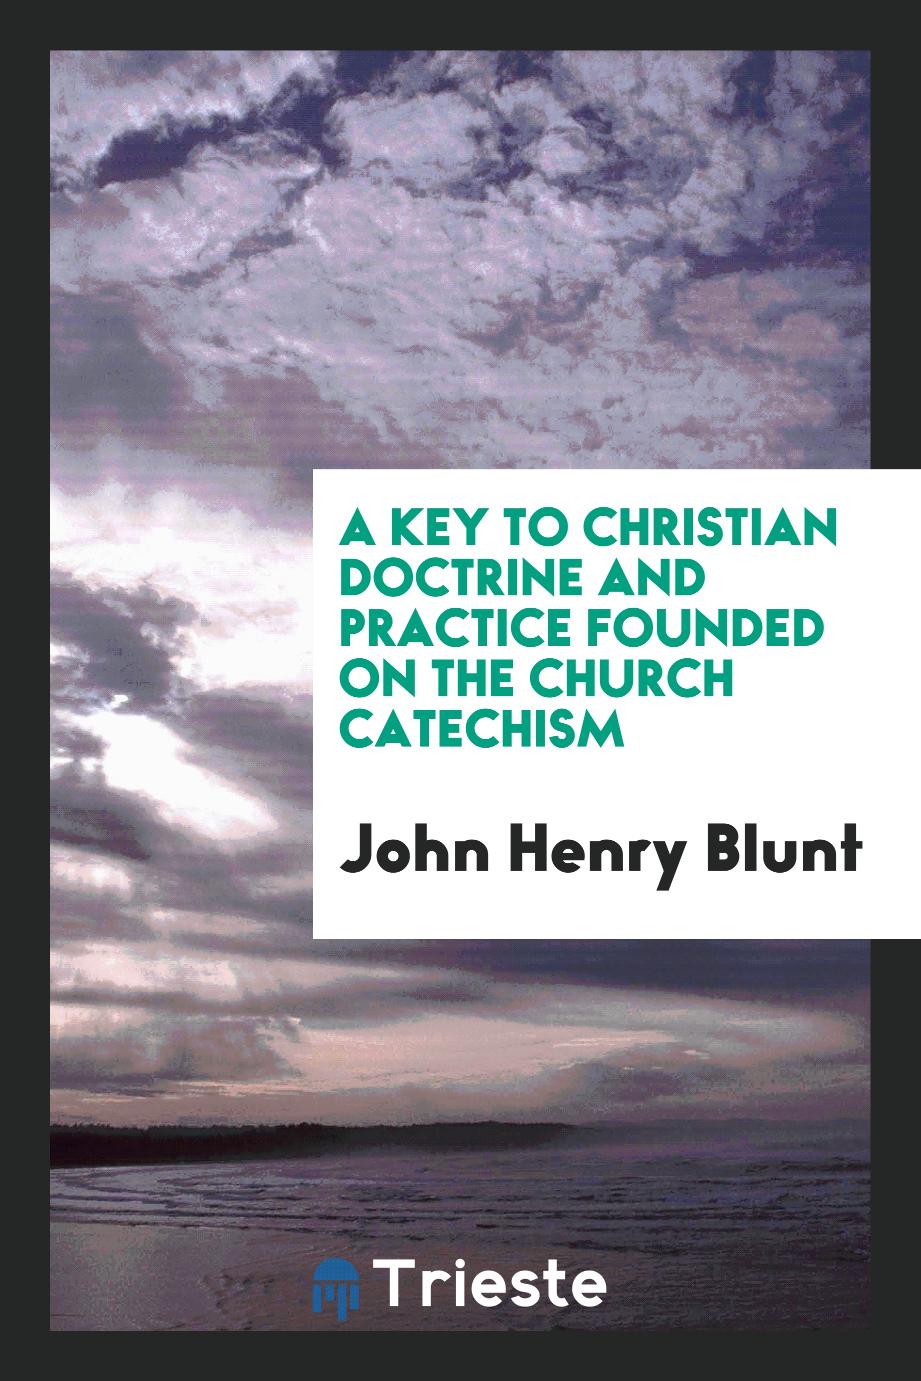 A Key to Christian Doctrine and Practice Founded on the Church Catechism